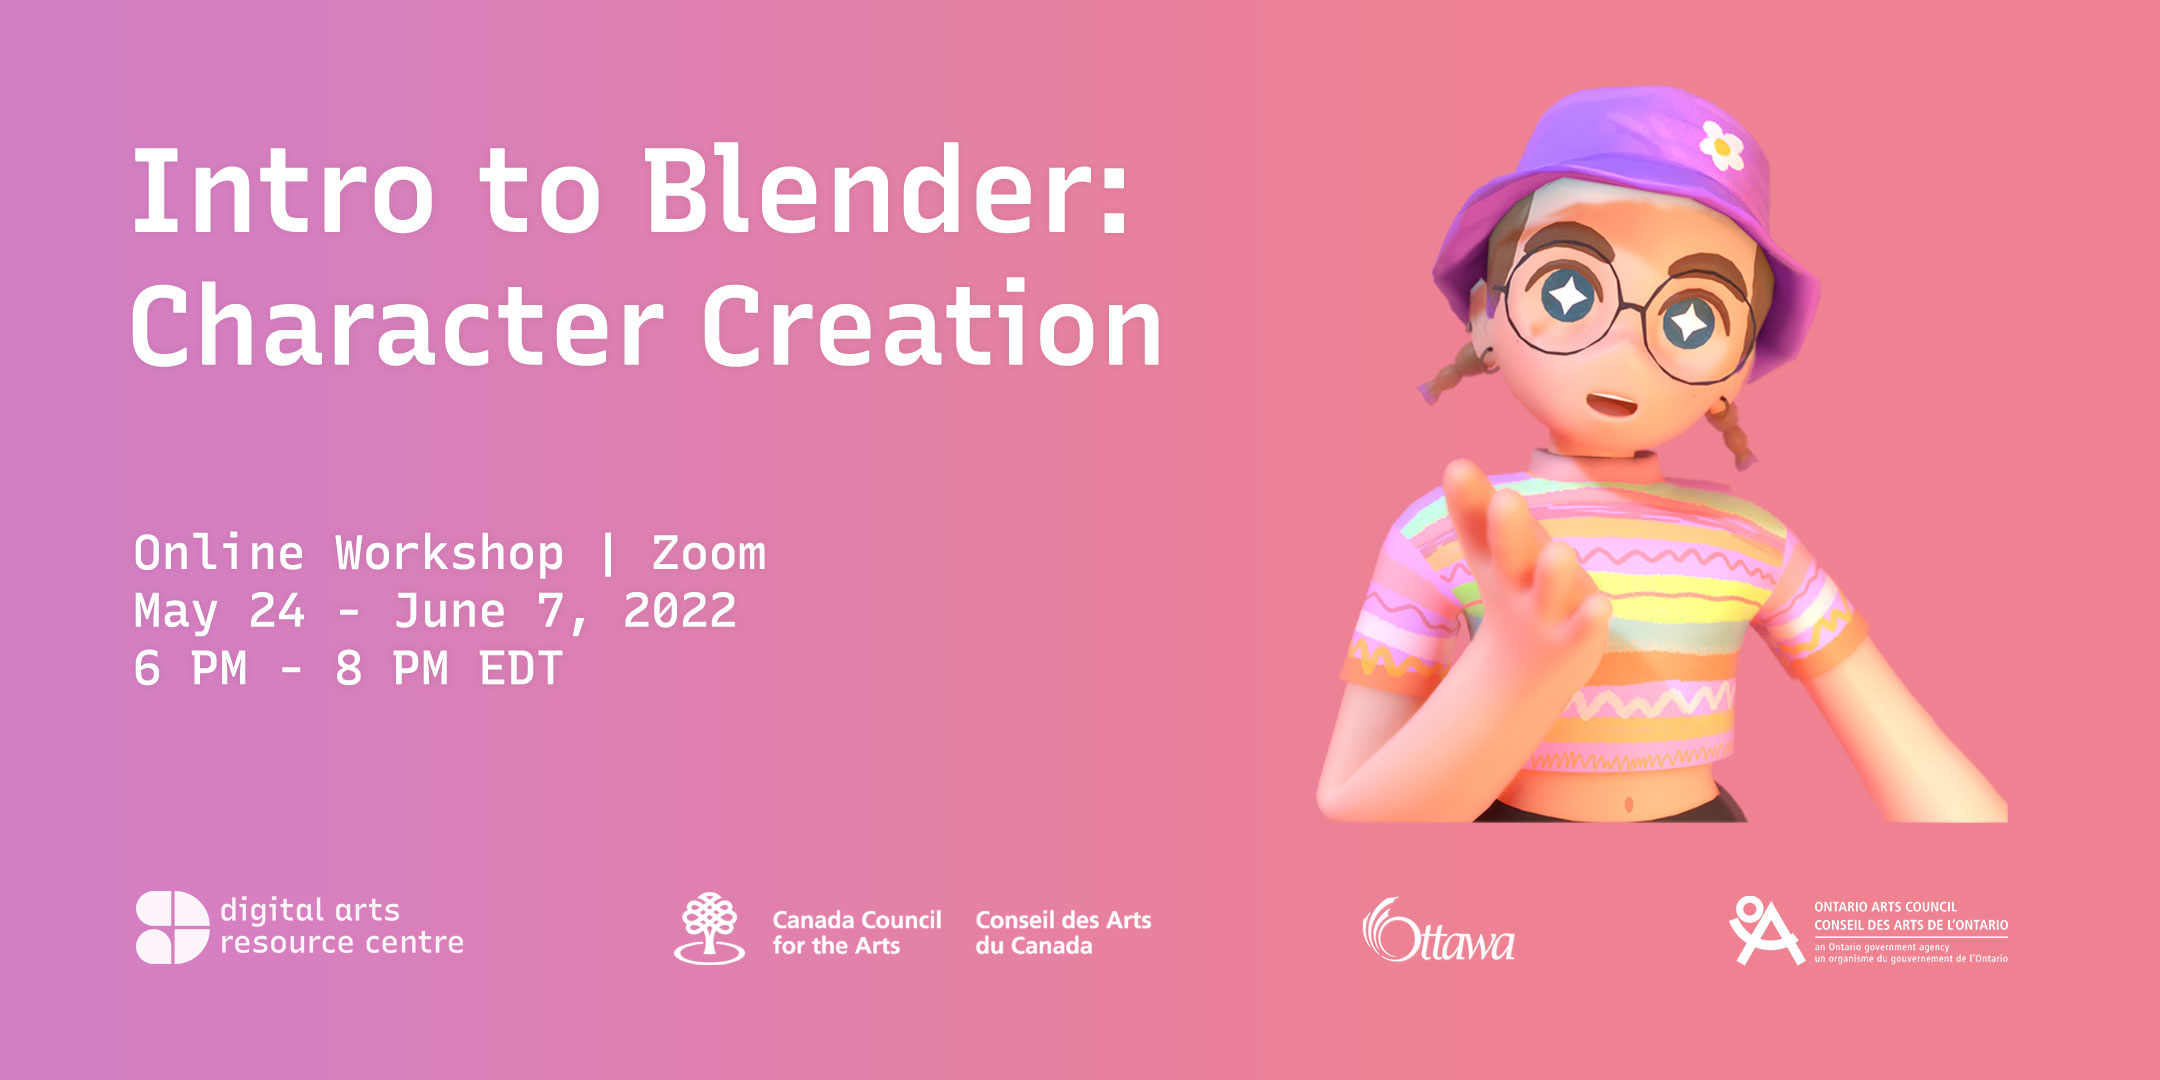 3D model of a character wearing glasses and a bucket hat